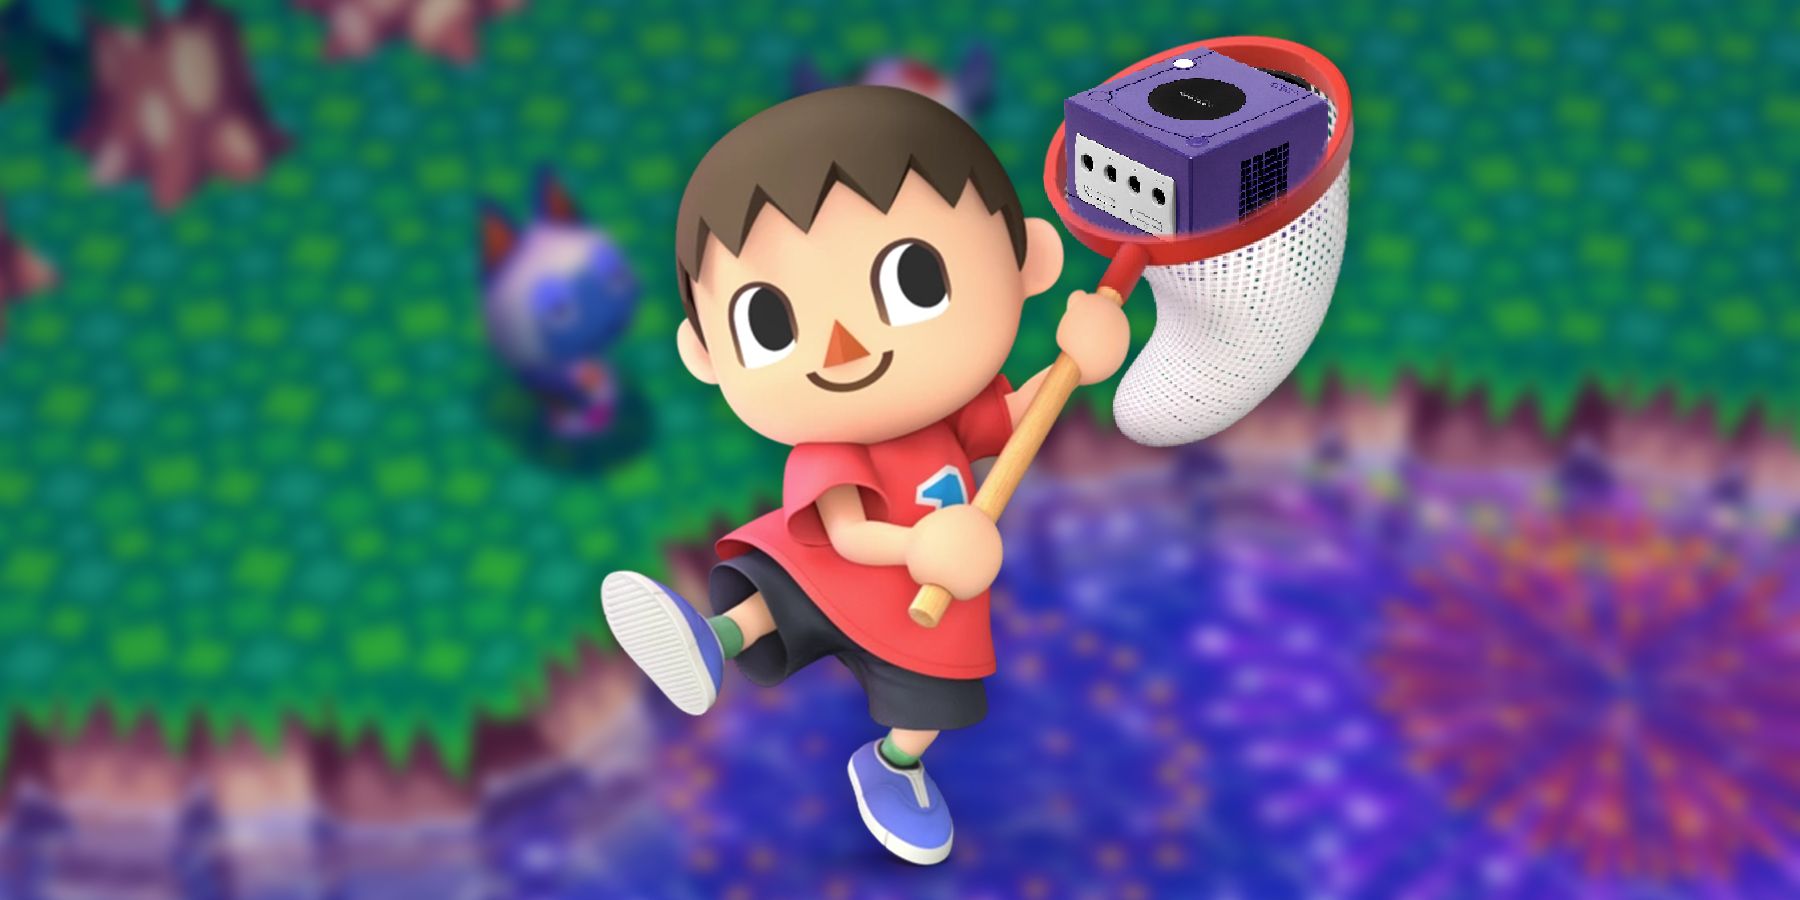 animal-crossing-new-horizons-successor-can-t-keep-a-sleepy-bear-villager-abandoned-on-gamecube